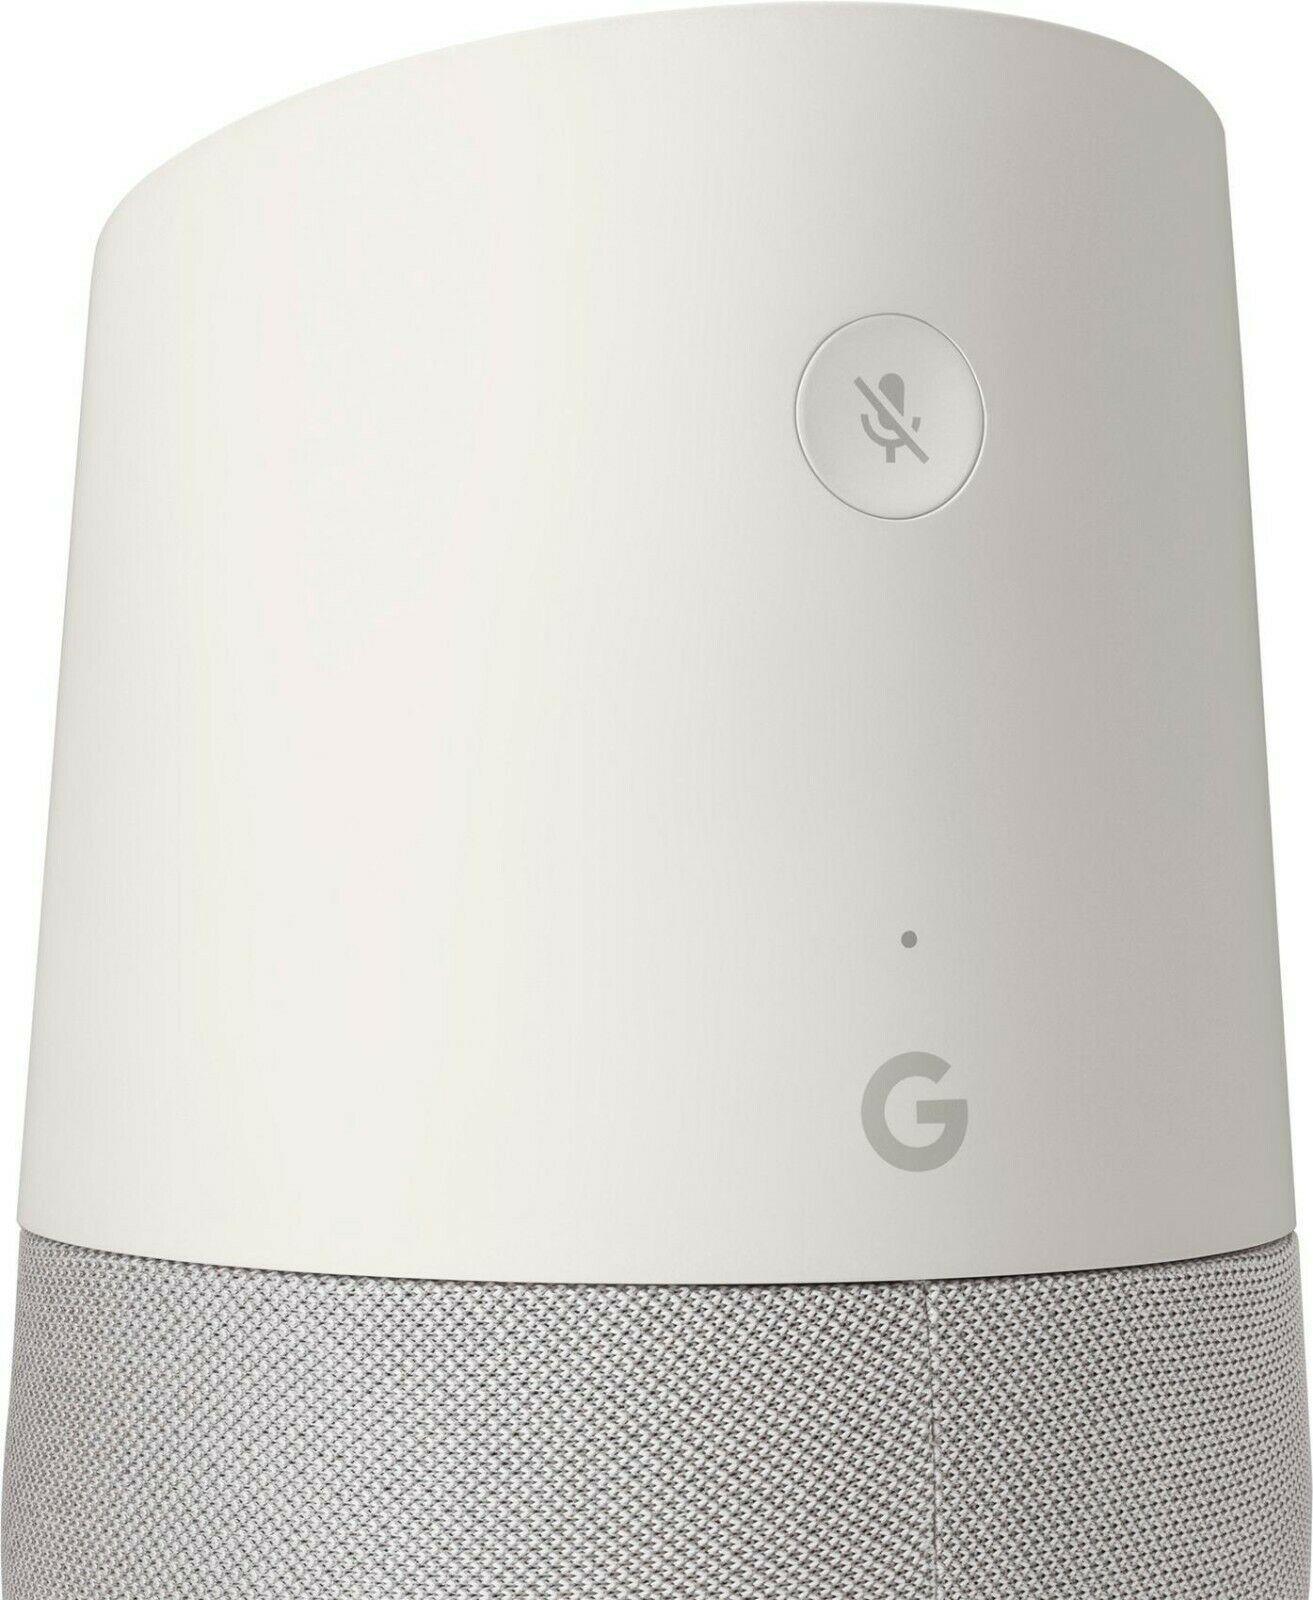 Google Home - Smart Speaker with Google Assistant - White Slate - Etyn Online {{ product_tag }}